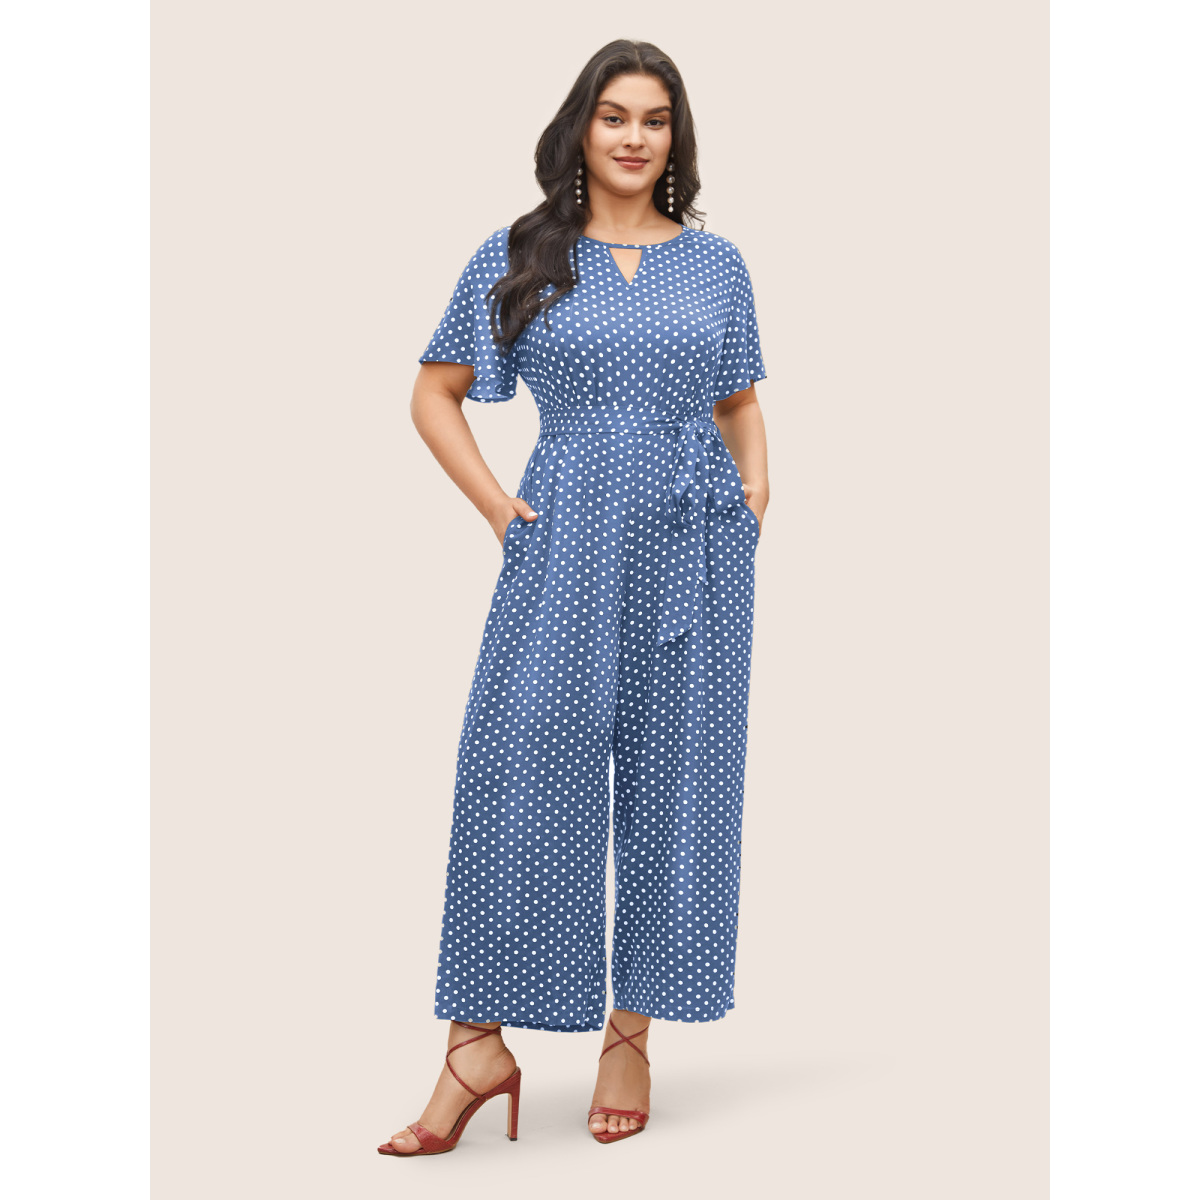 

Plus Size Skyblue Polka Dot Cut Out Zipper Belted Jumpsuit Women Elegant Short sleeve Notched collar Everyday Loose Jumpsuits BloomChic